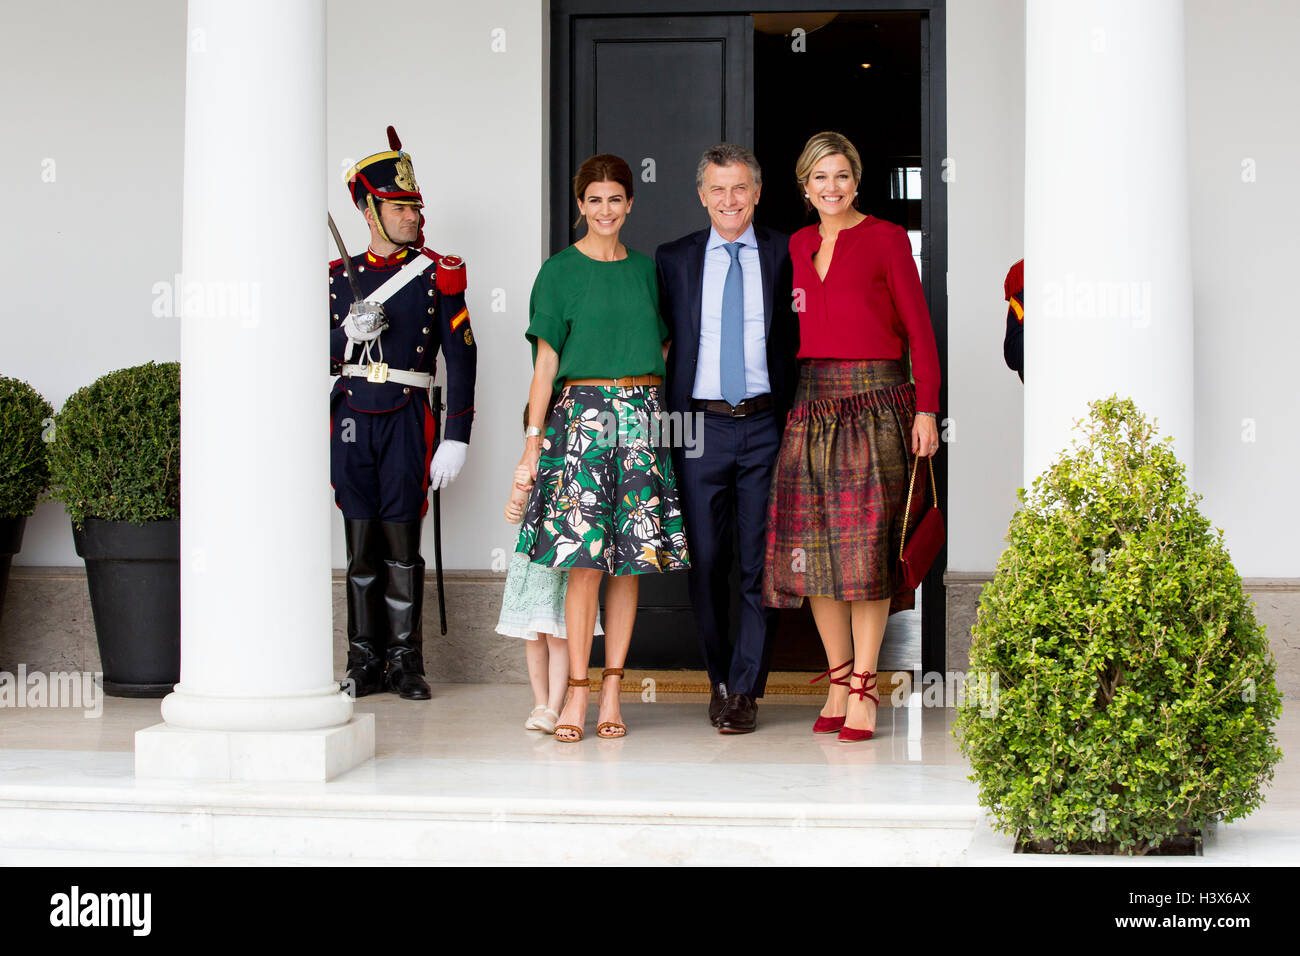 Buenos Aires, Argentina. 12th October, 2016. Queen Maxima of The Netherlands visits President Mauricio Macri and his wife Julia Awada and their daughter Antonia at the Residencia de Olivos the president·s residence in Buenos Aires, 12 October 2016. Queen Maxima visits Buenos Aires as United Nation·s Secretary General·s Special Advocate for Inclusive Finance for Development. Credit:  dpa picture alliance/Alamy Live News Stock Photo